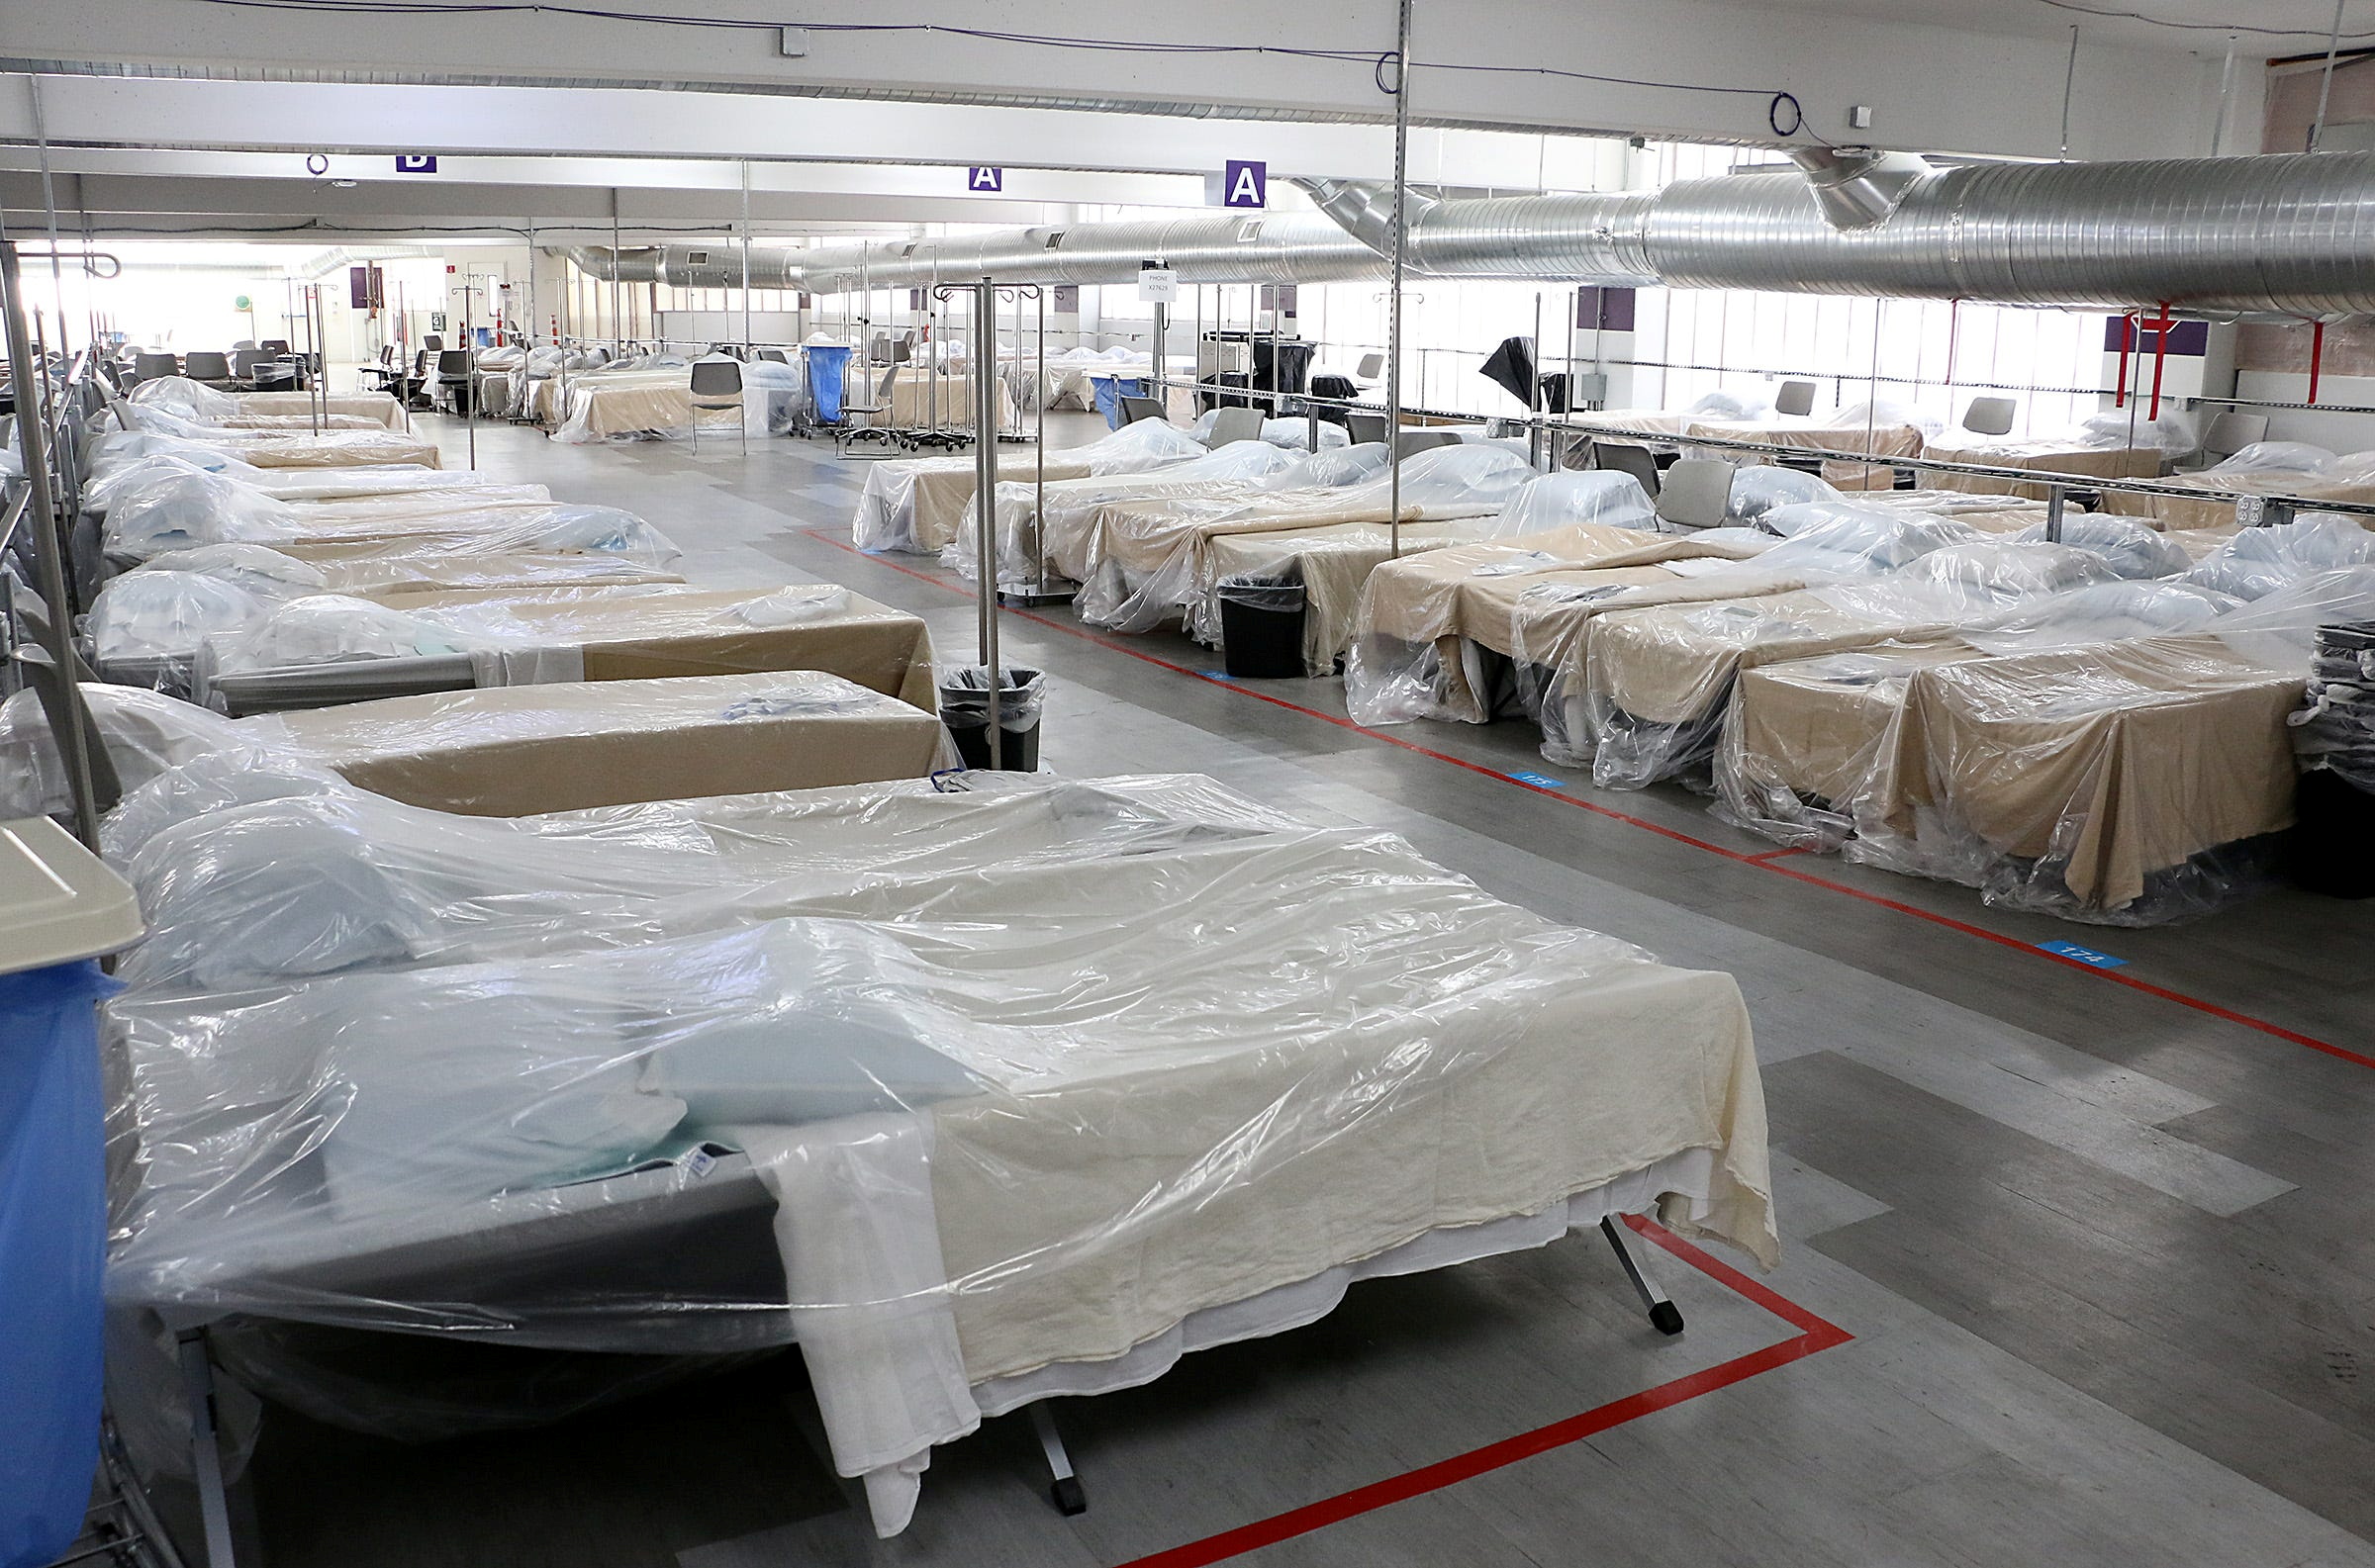 Back-up hospital beds are seen in the parking garage at the Renown Regional Medical Center in Reno, Nevada, U.S. November 11, 2020. Picture taken November 11, 2020. Jason Bean/Reno Gazette Journal/USA Today via REUTERS  THIS IMAGE HAS BEEN SUPPLIED BY A THIRD PARTY.